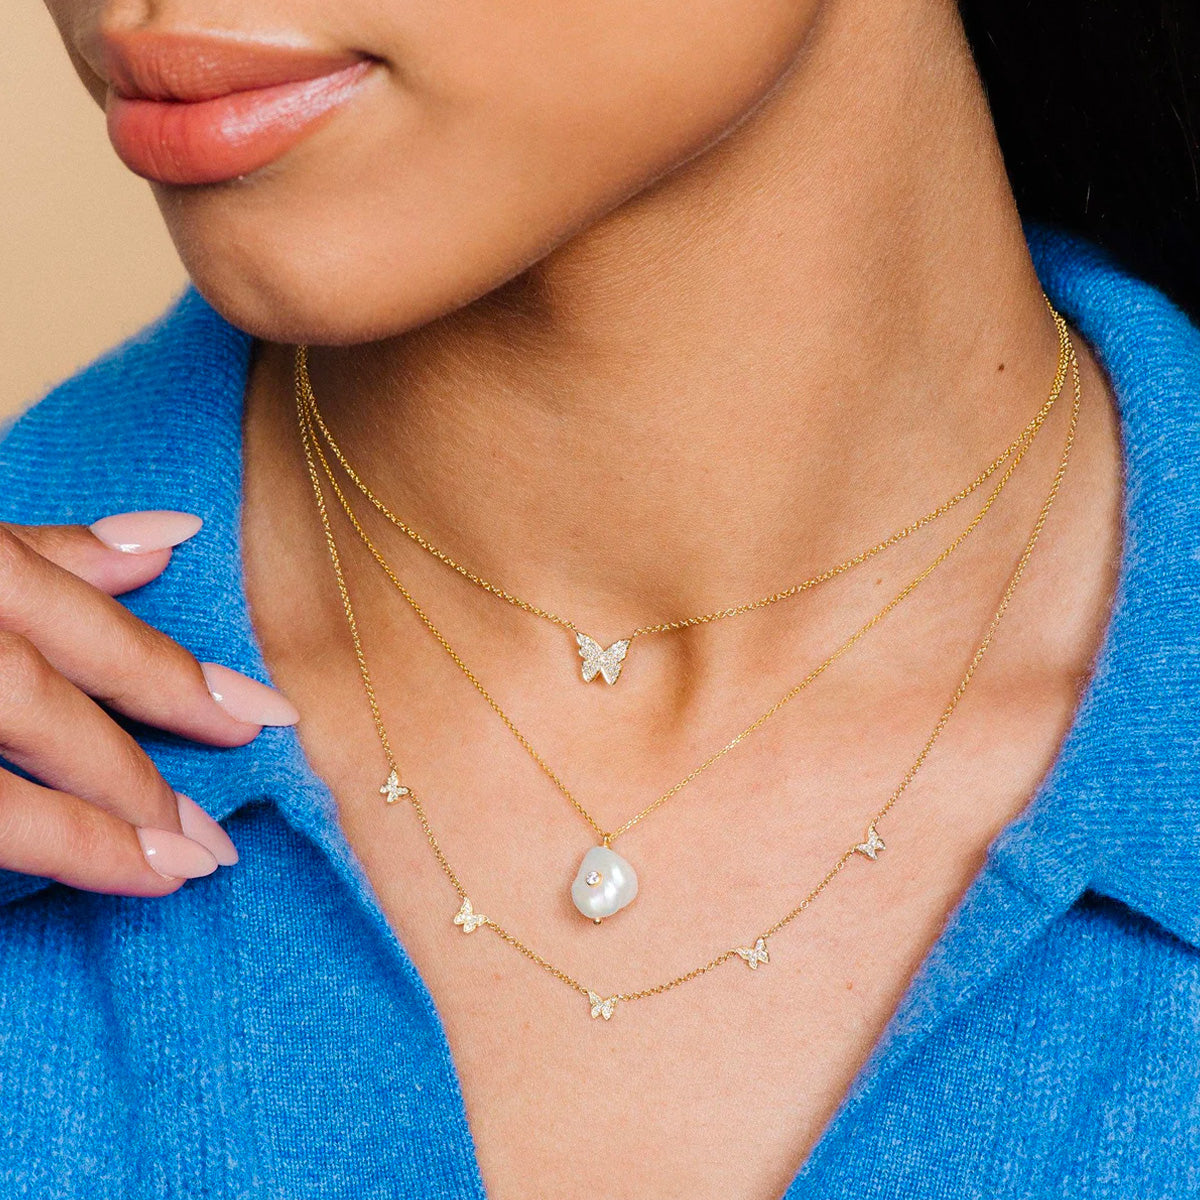 Tips on How to Elegantly Layer Multiple Necklaces